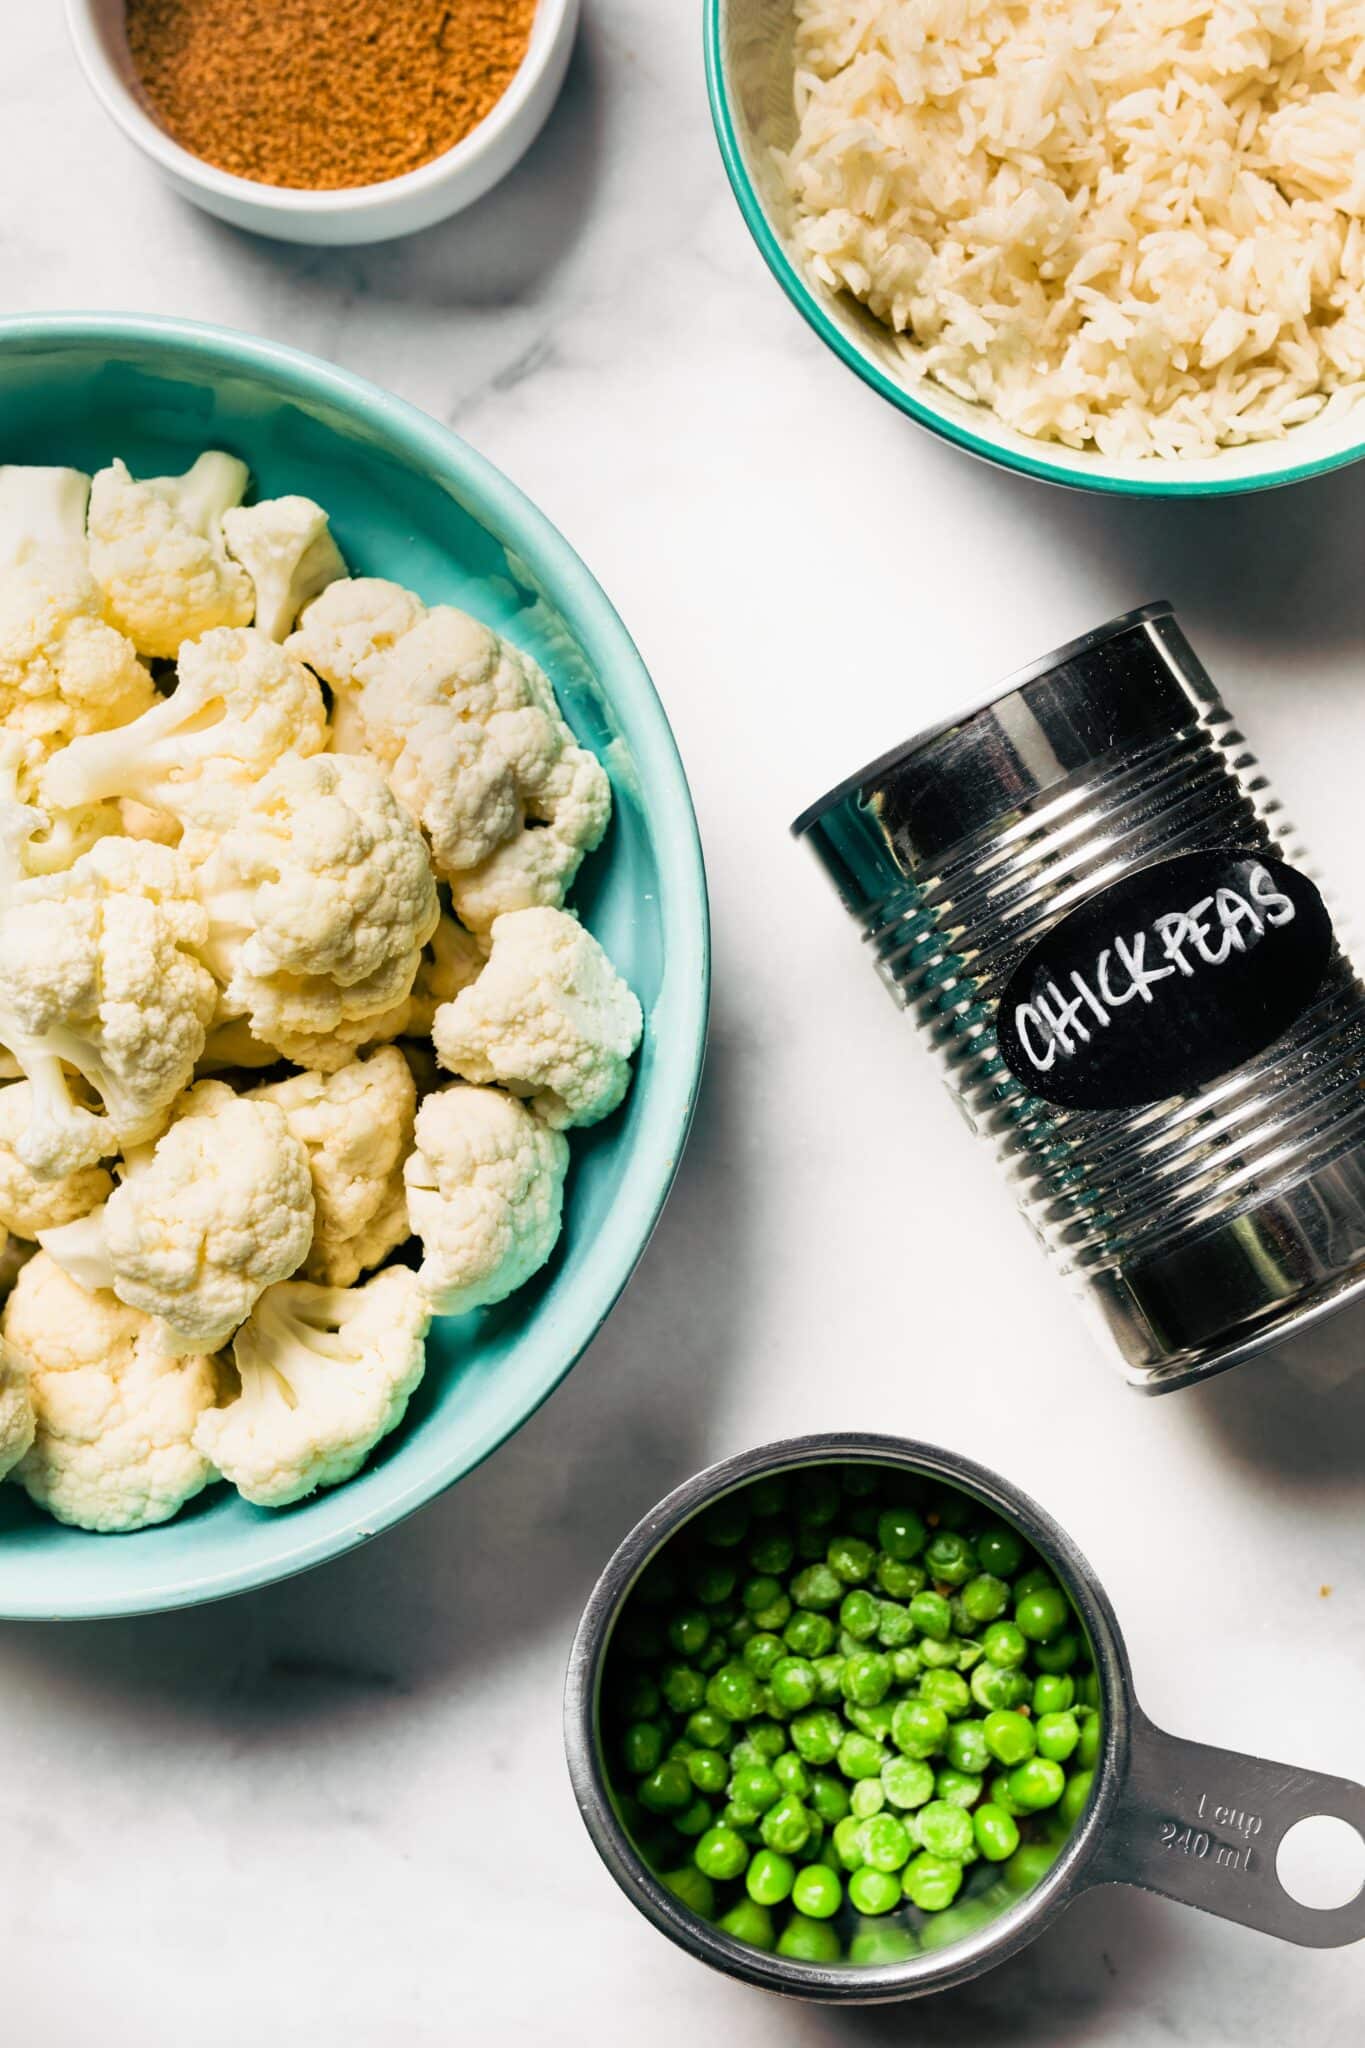 Bowls of cauliflower, rice, green peas and a can of chickpeas on a white countertop.